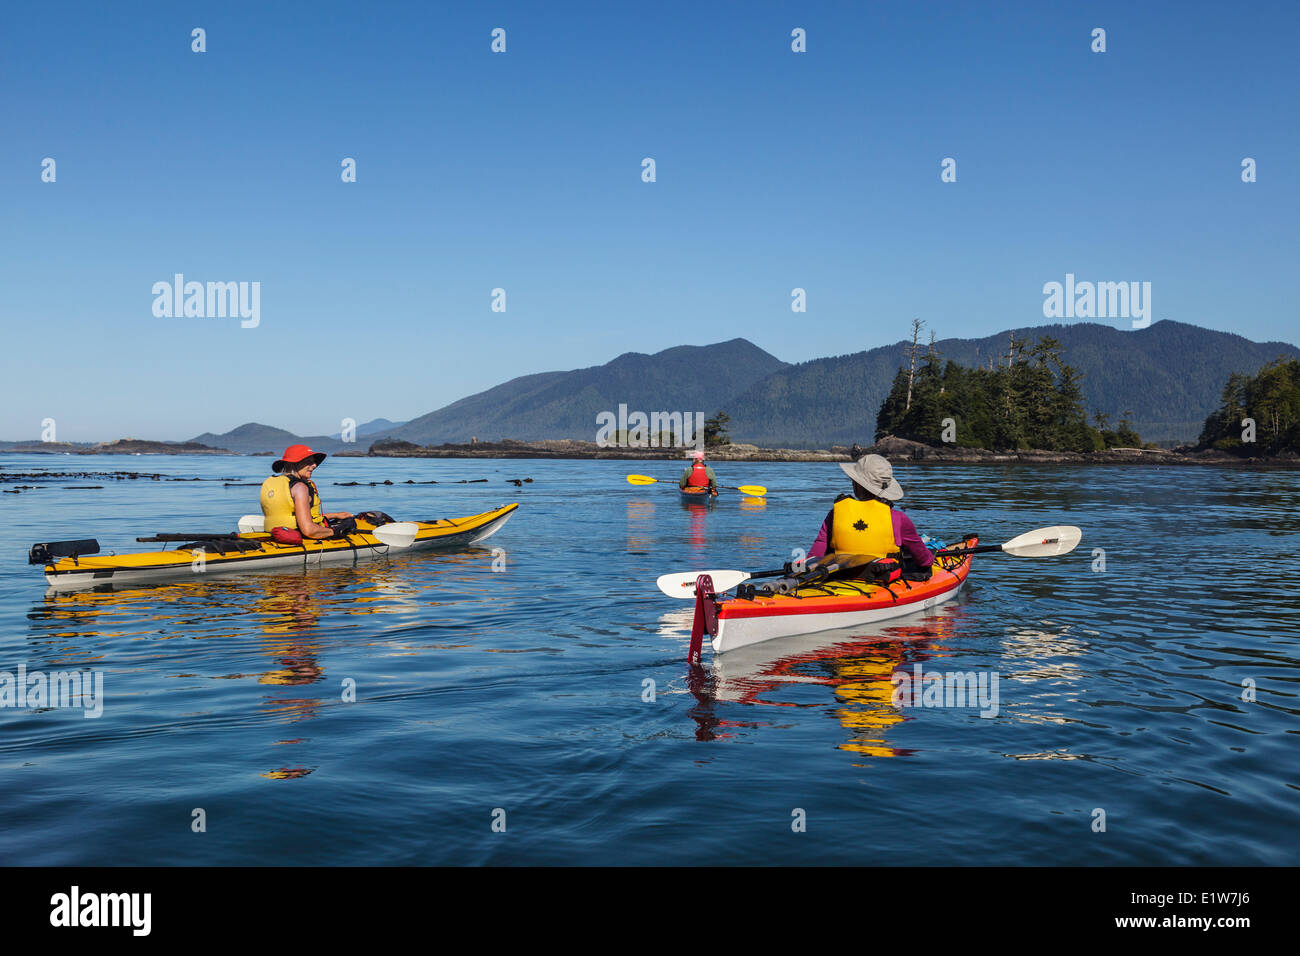 Three kayakers drift in the calm waters of Clayoquot Sound off the west coast of Vancouver Island British Columbia, Canada.Model Stock Photo